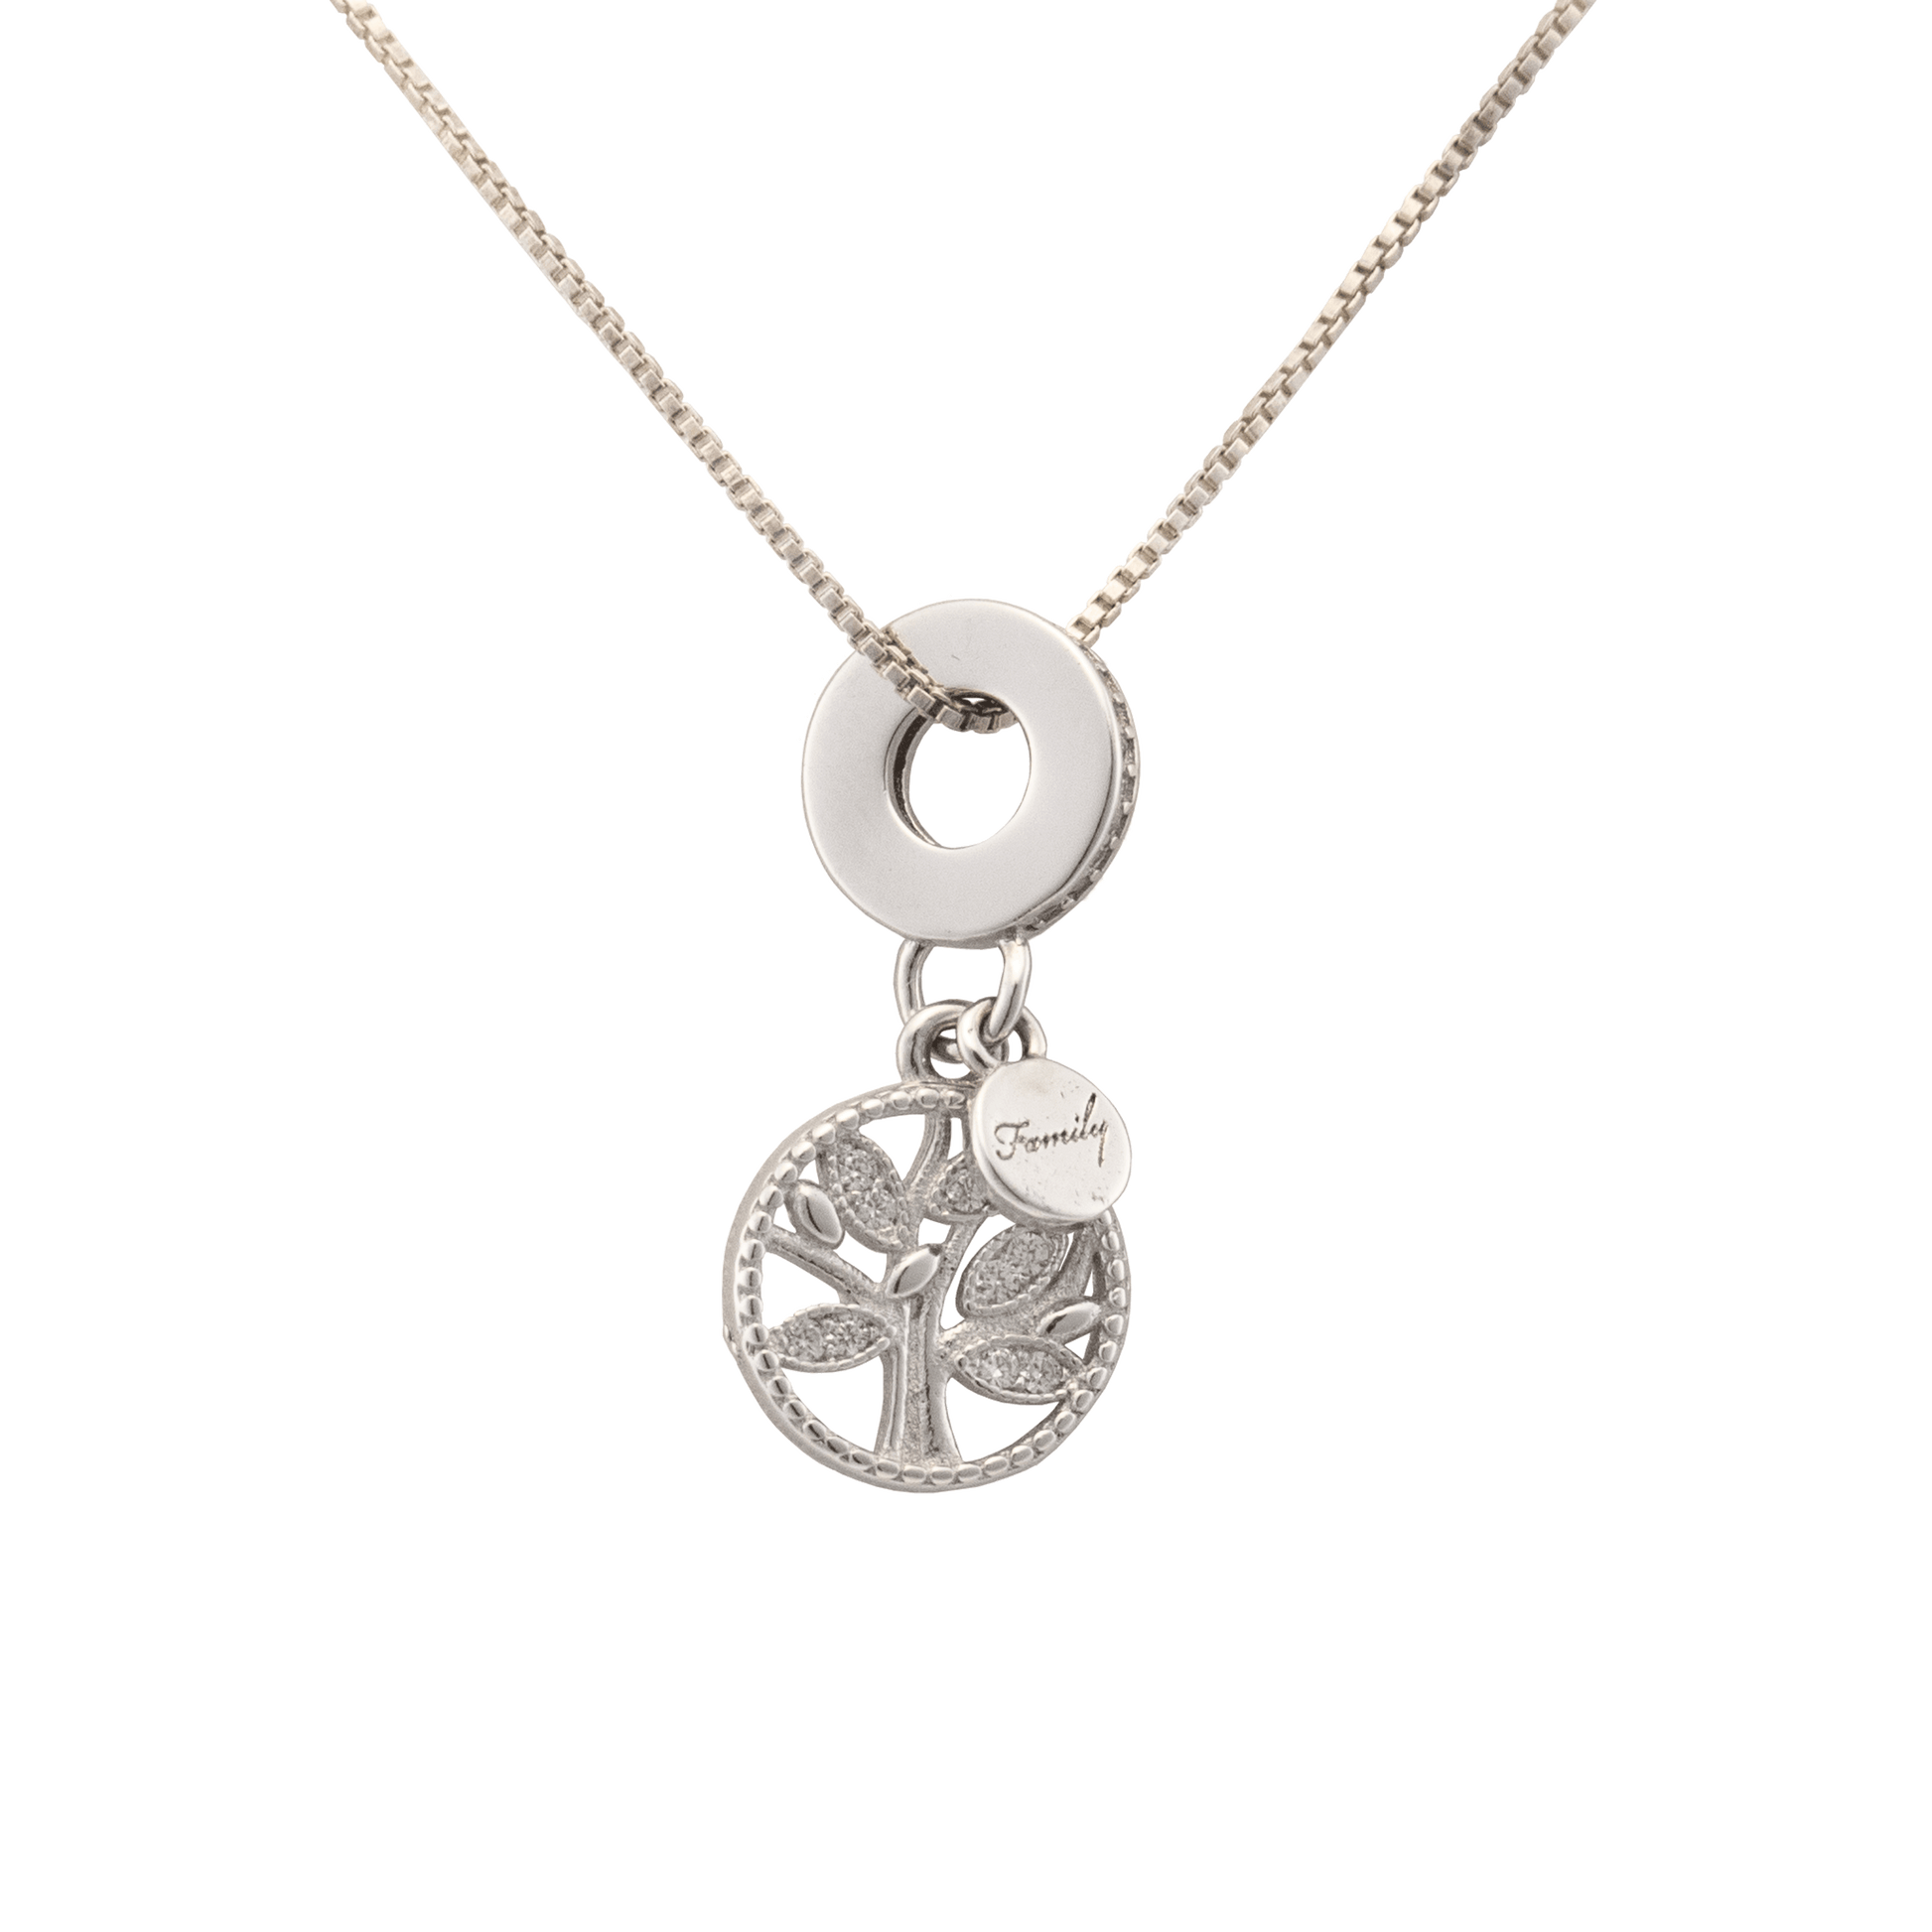 silver and Jewel filled Tree in a circular pendant with silver disc engraved with "family" on a silver chain